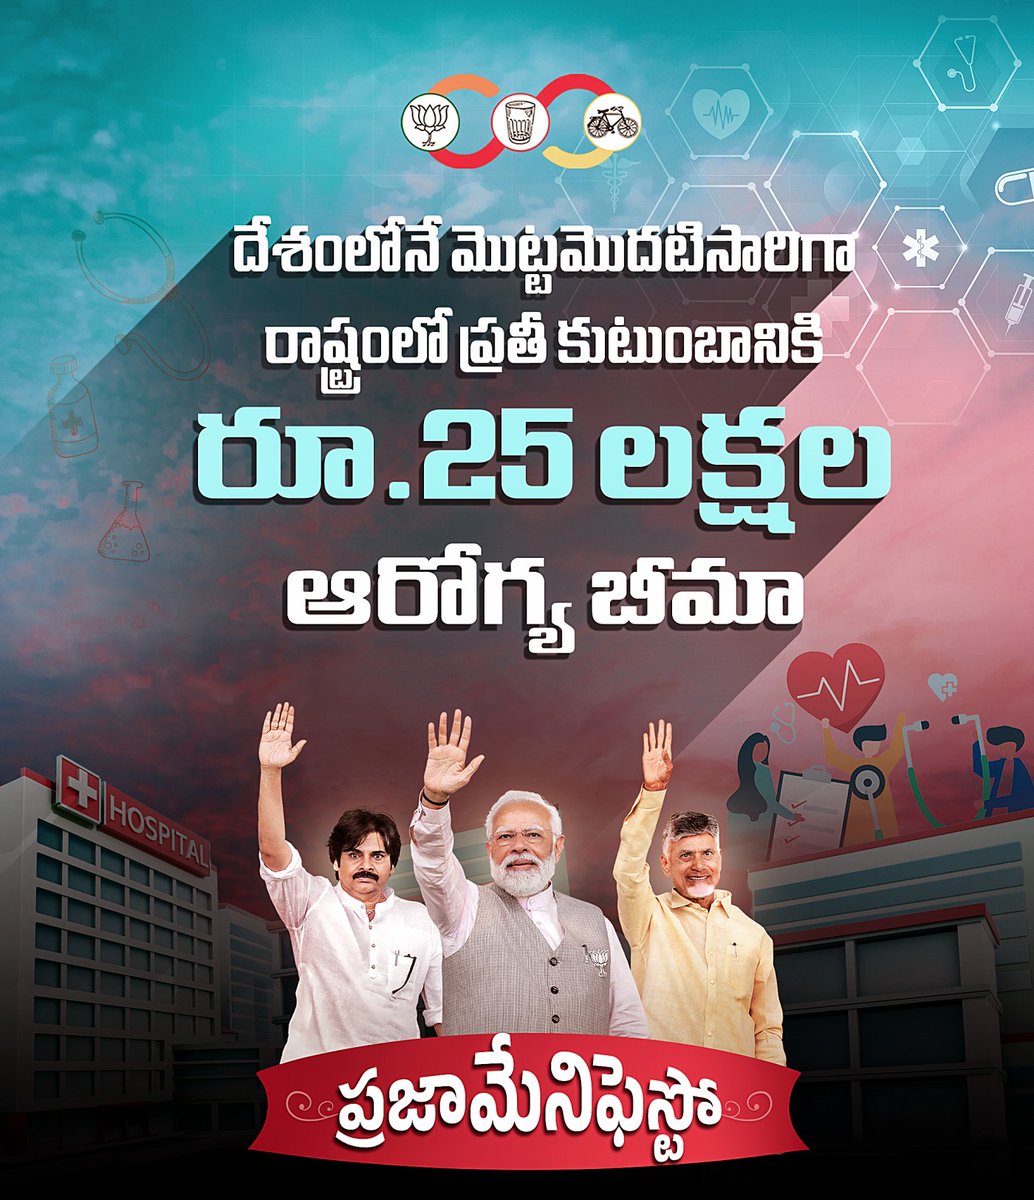 Every family in Andhra Pradesh will be provided with 25 Lakh health insurance. AP will be the first state in INDIA to have this kind of policy. HISTORY IN MAKING 🔥 VOTE FOR NDA ✊🎯🙏 #PrajaManifesto #VoteForGlass | #VoteForNDA | #VoteForCycle #AllianceForABetterFuture